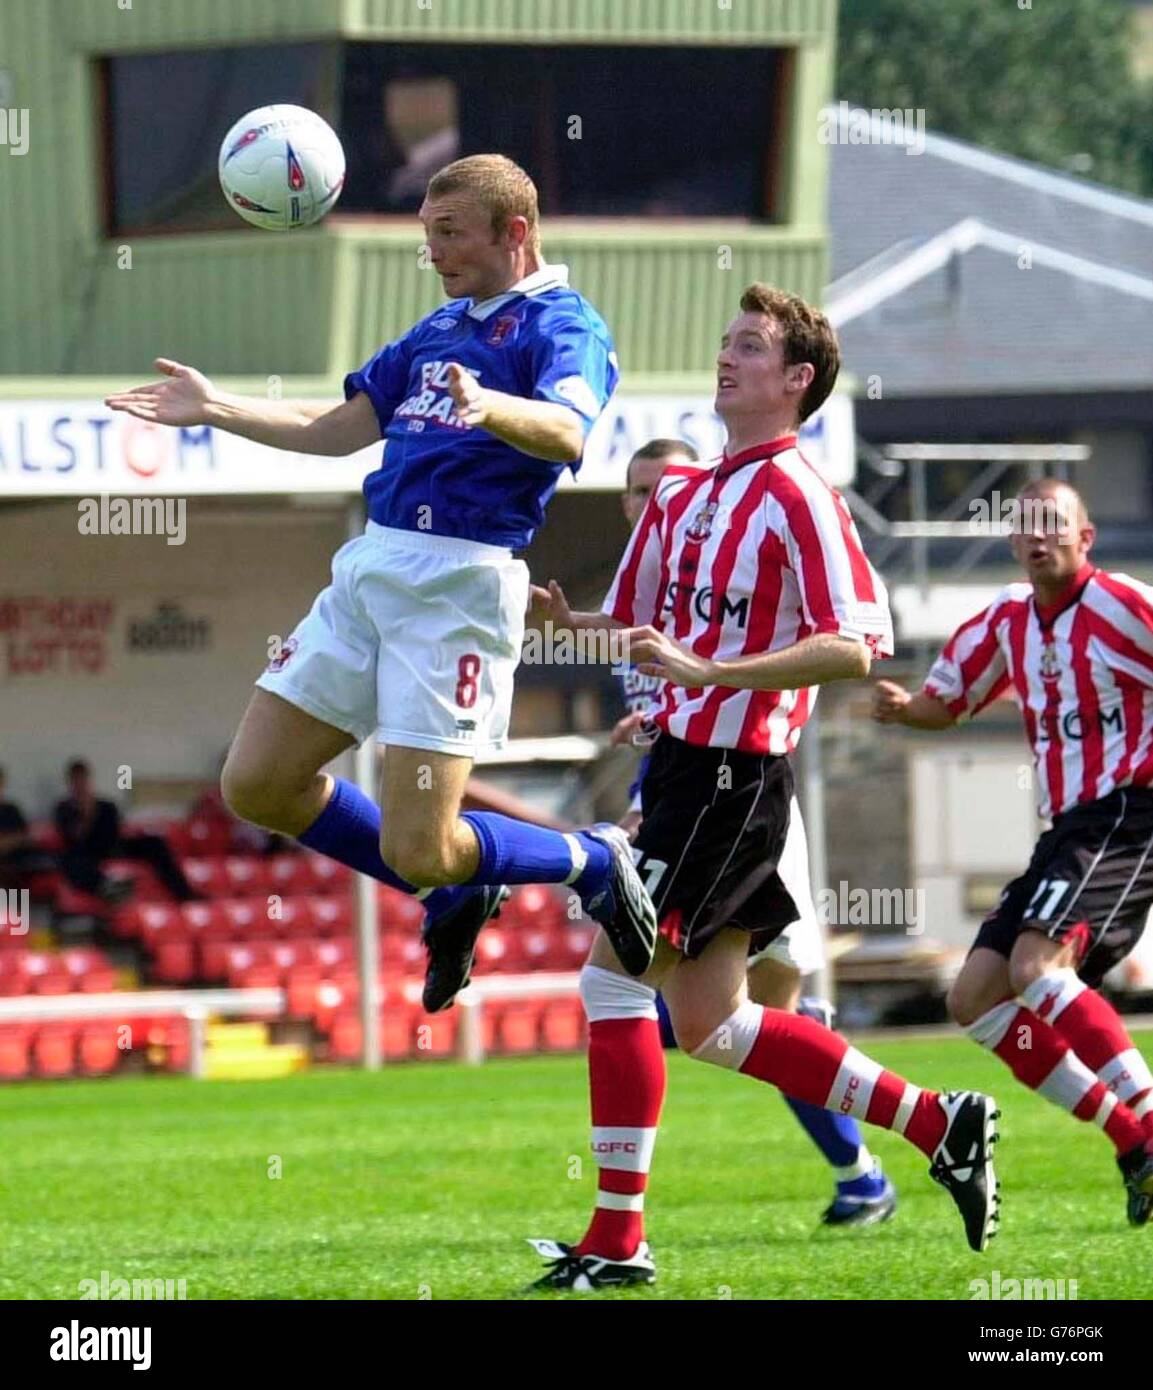 Carlisle United's Mick Galloway (left) wins an aerial ball ahead of Lincoln City's Peter Gain , during their Nationwide Division Three match at Lincoln's Sincil Bank ground. NO UNOFFICIAL CLUB WEBSITE USE. Stock Photo